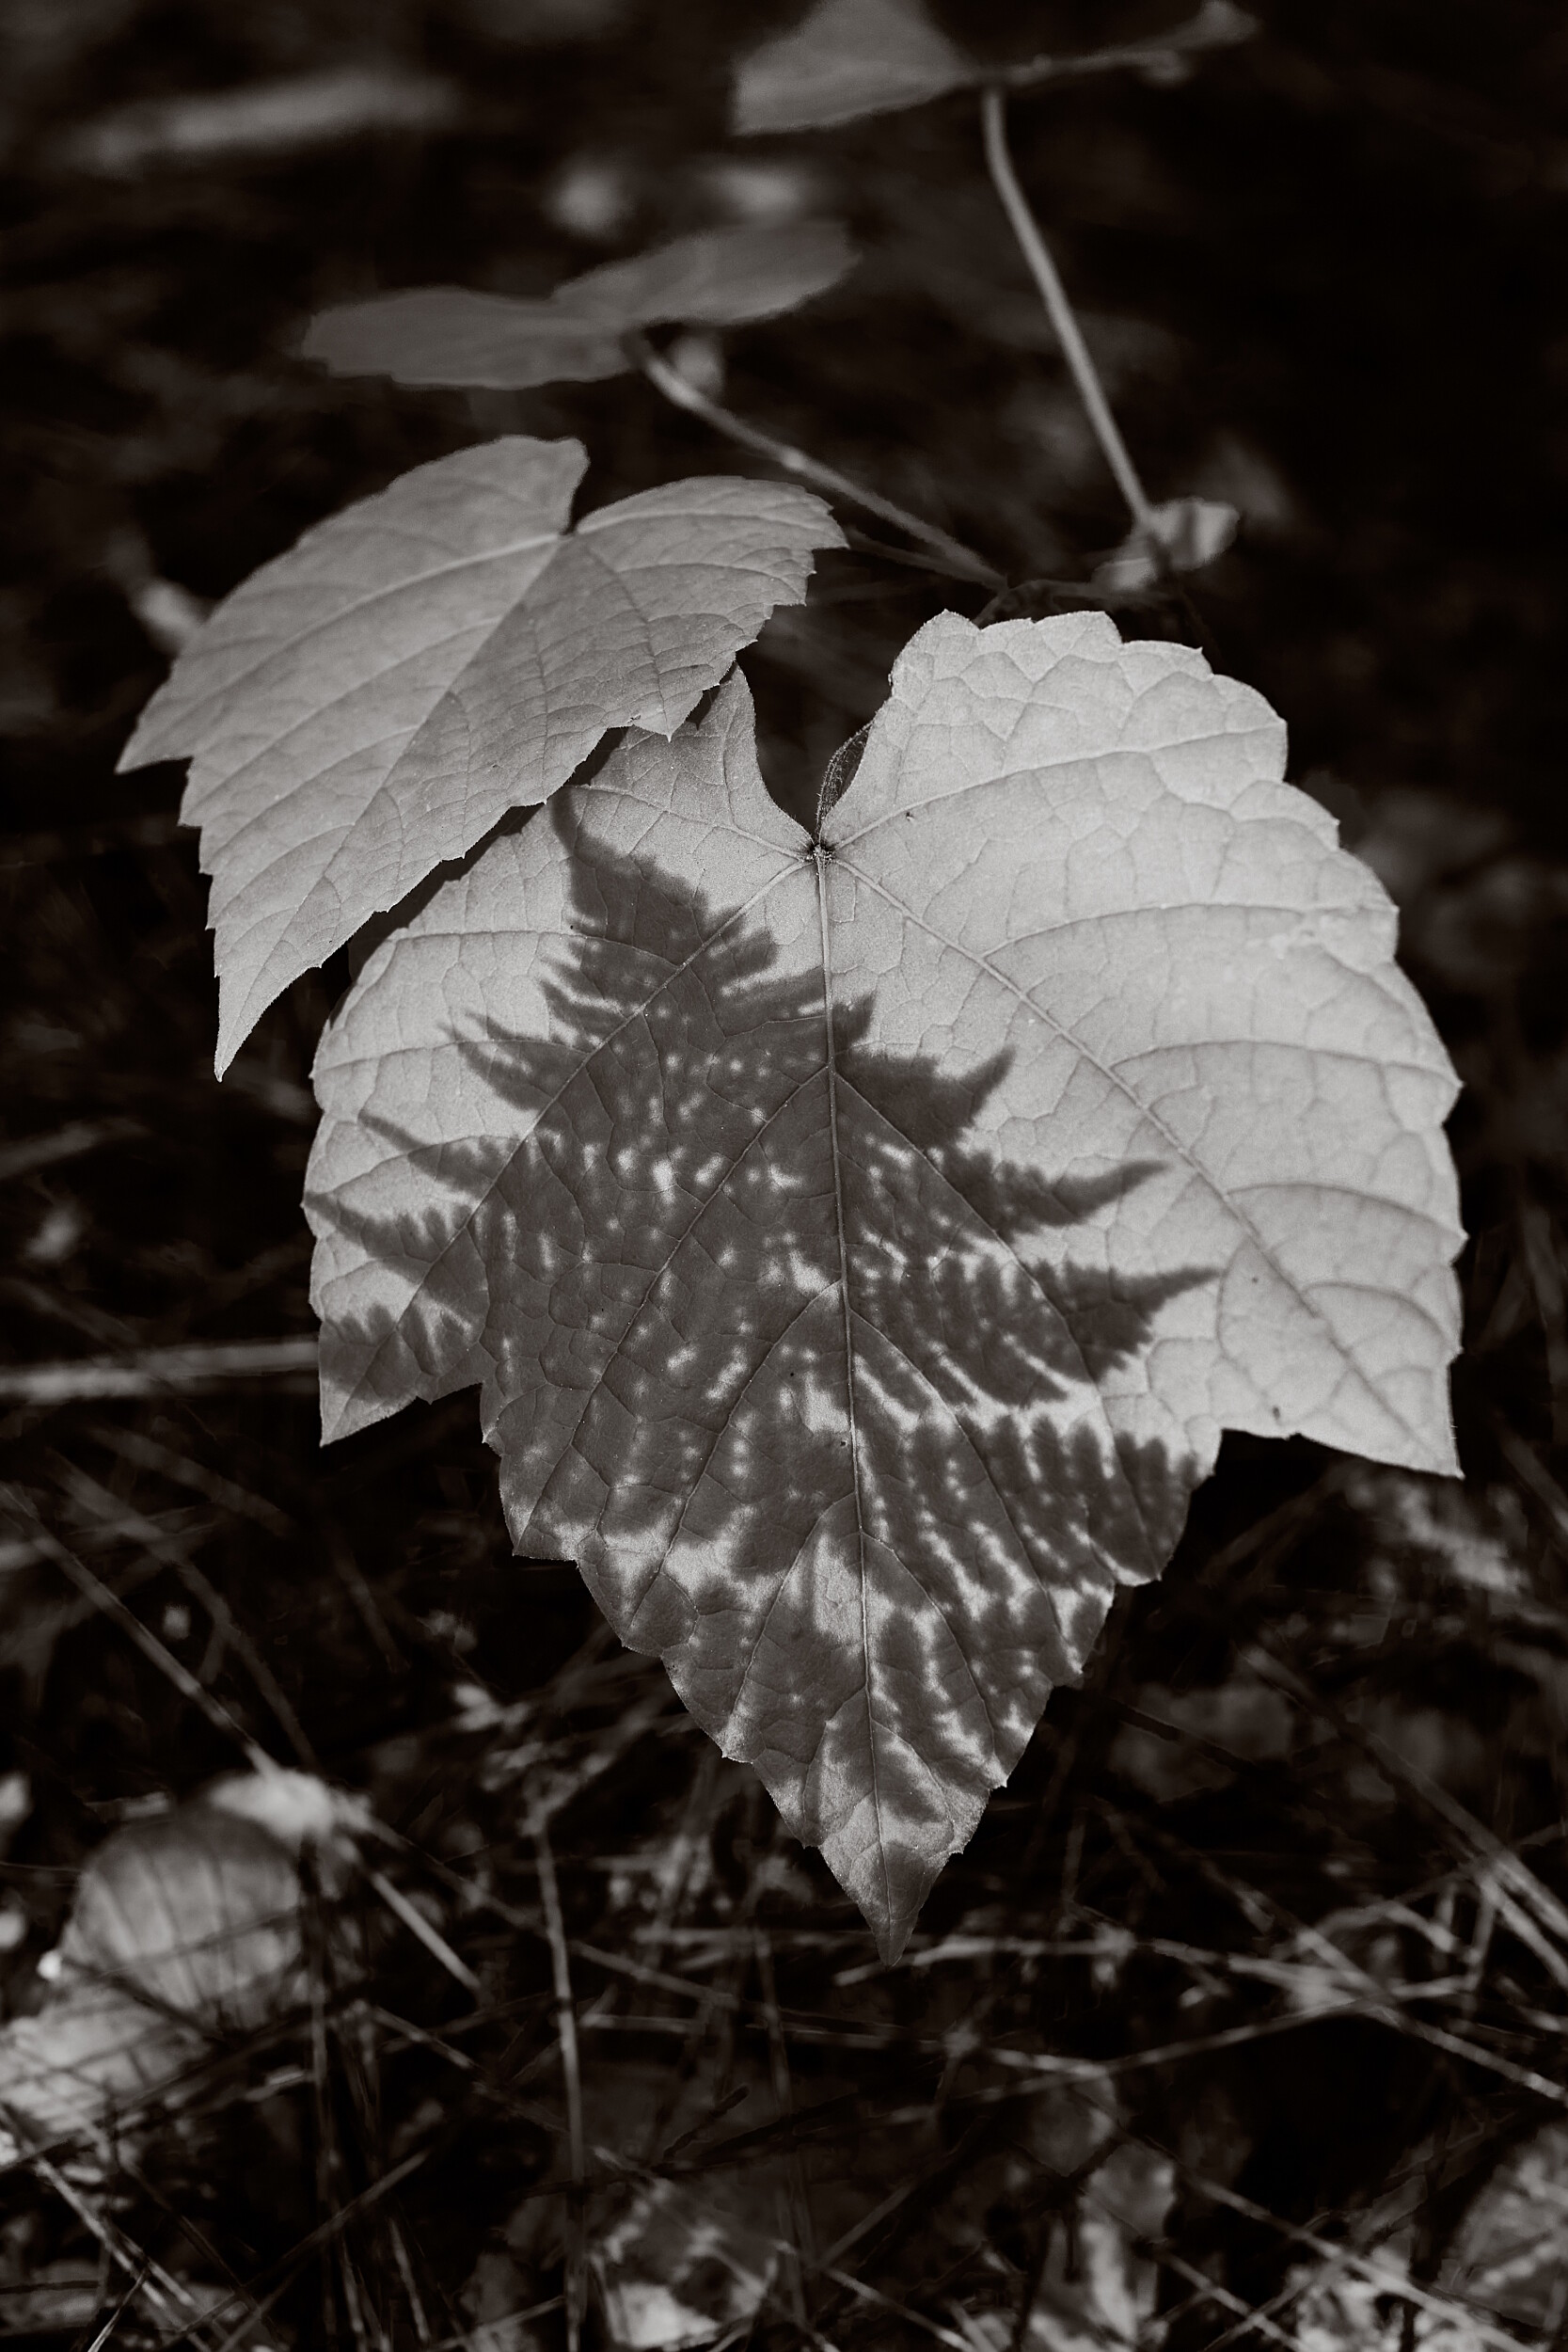 Shadow of a fern leaf on a new tree in the underbrush in Charlemont, Massachusetts.